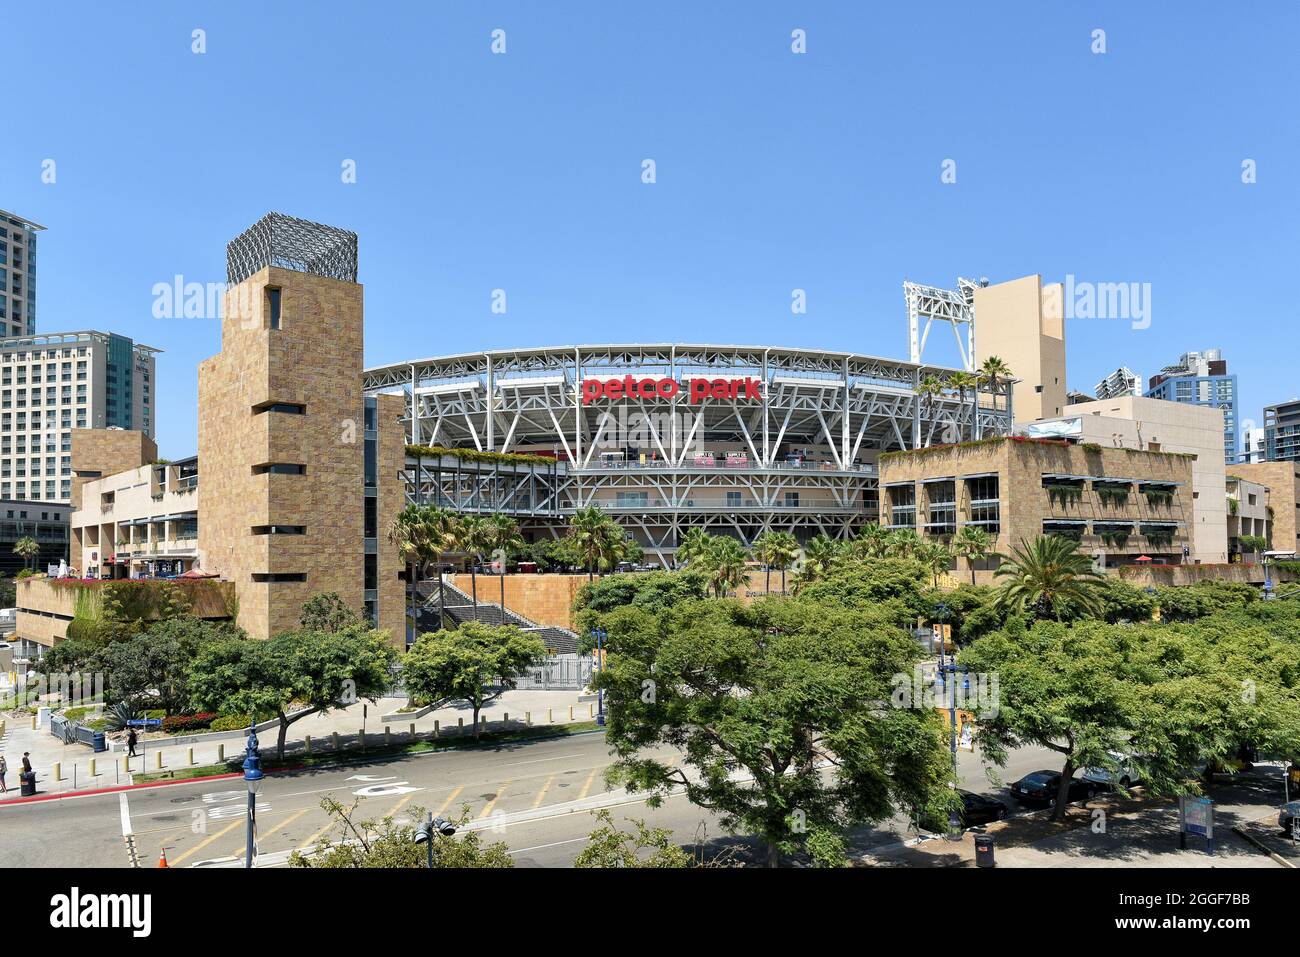 SAN DIEGO, CALIFORNIA - 25 AUG 2021: Petco Park, home of the San Diego Padres, seen from the Harbor Drive Pedestrian Bridge. Stock Photo